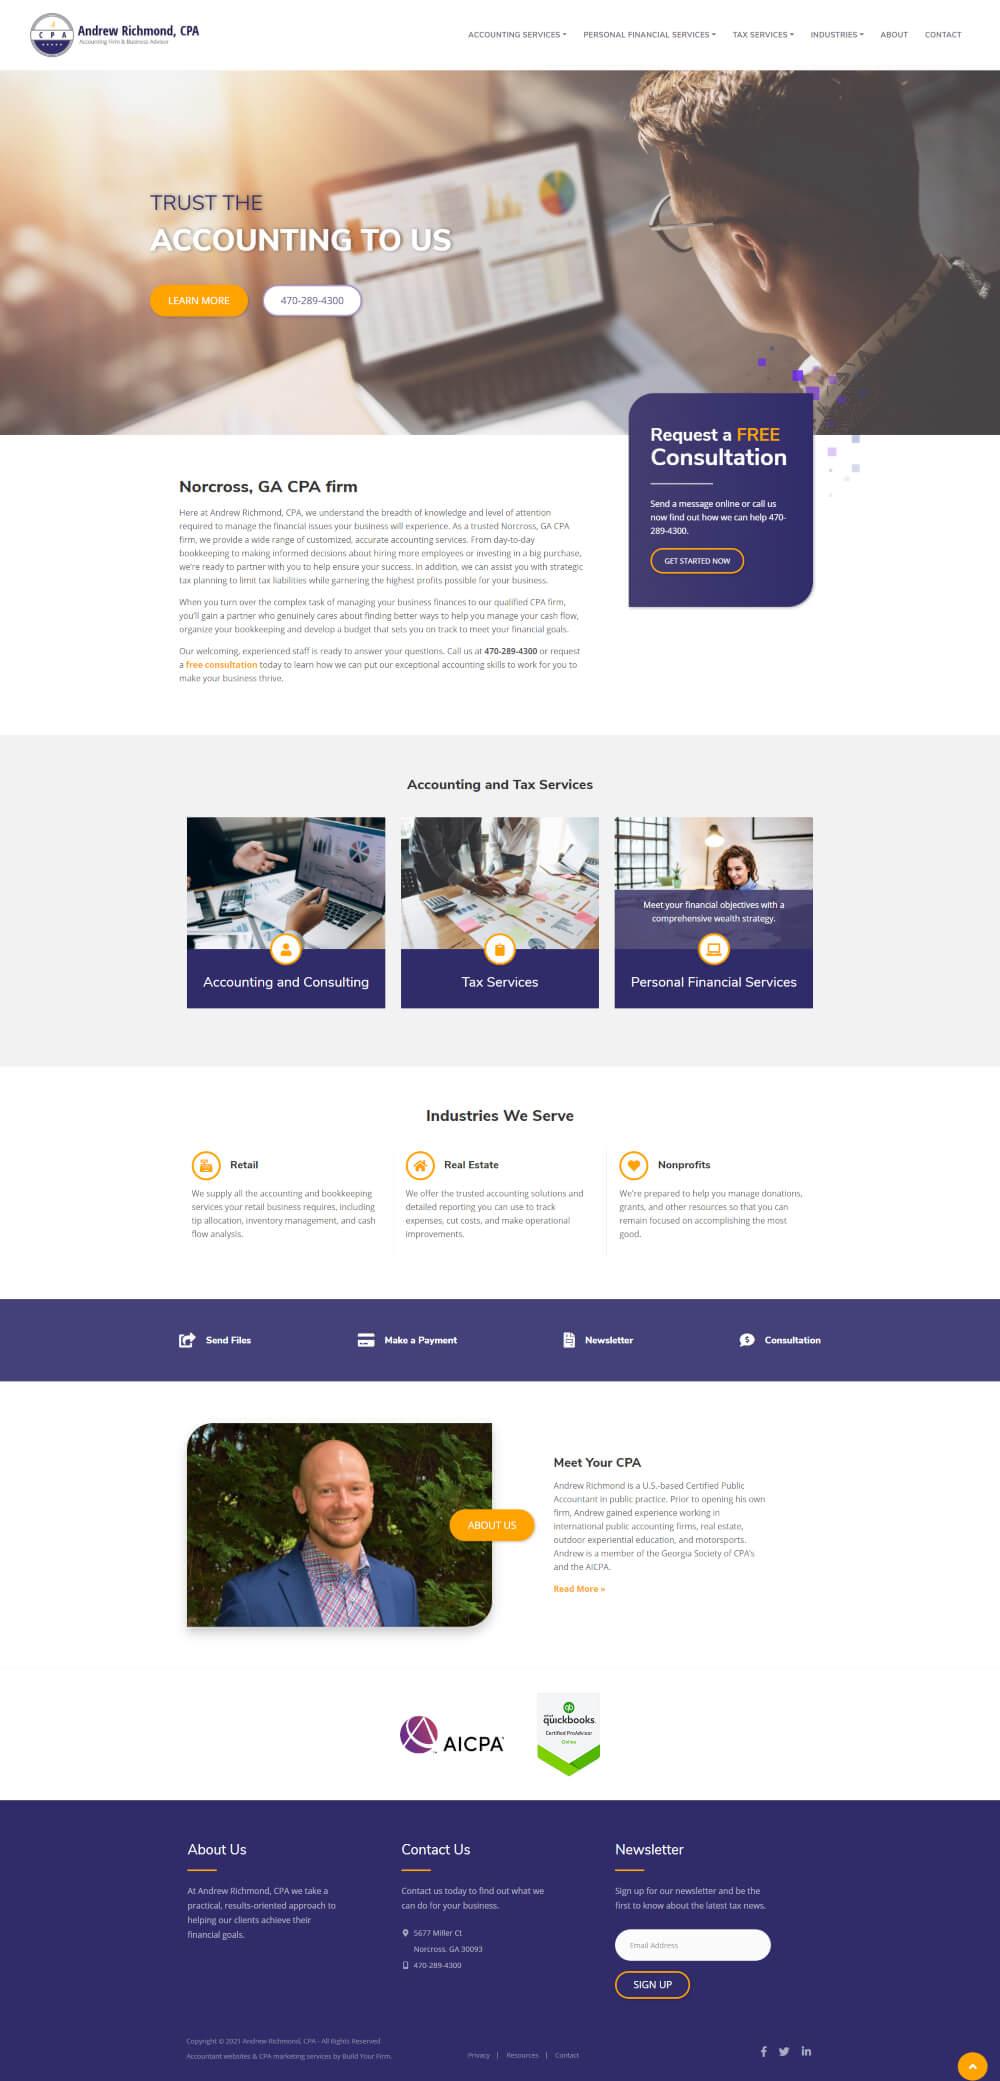 Website of Andrew Richmond, CPA